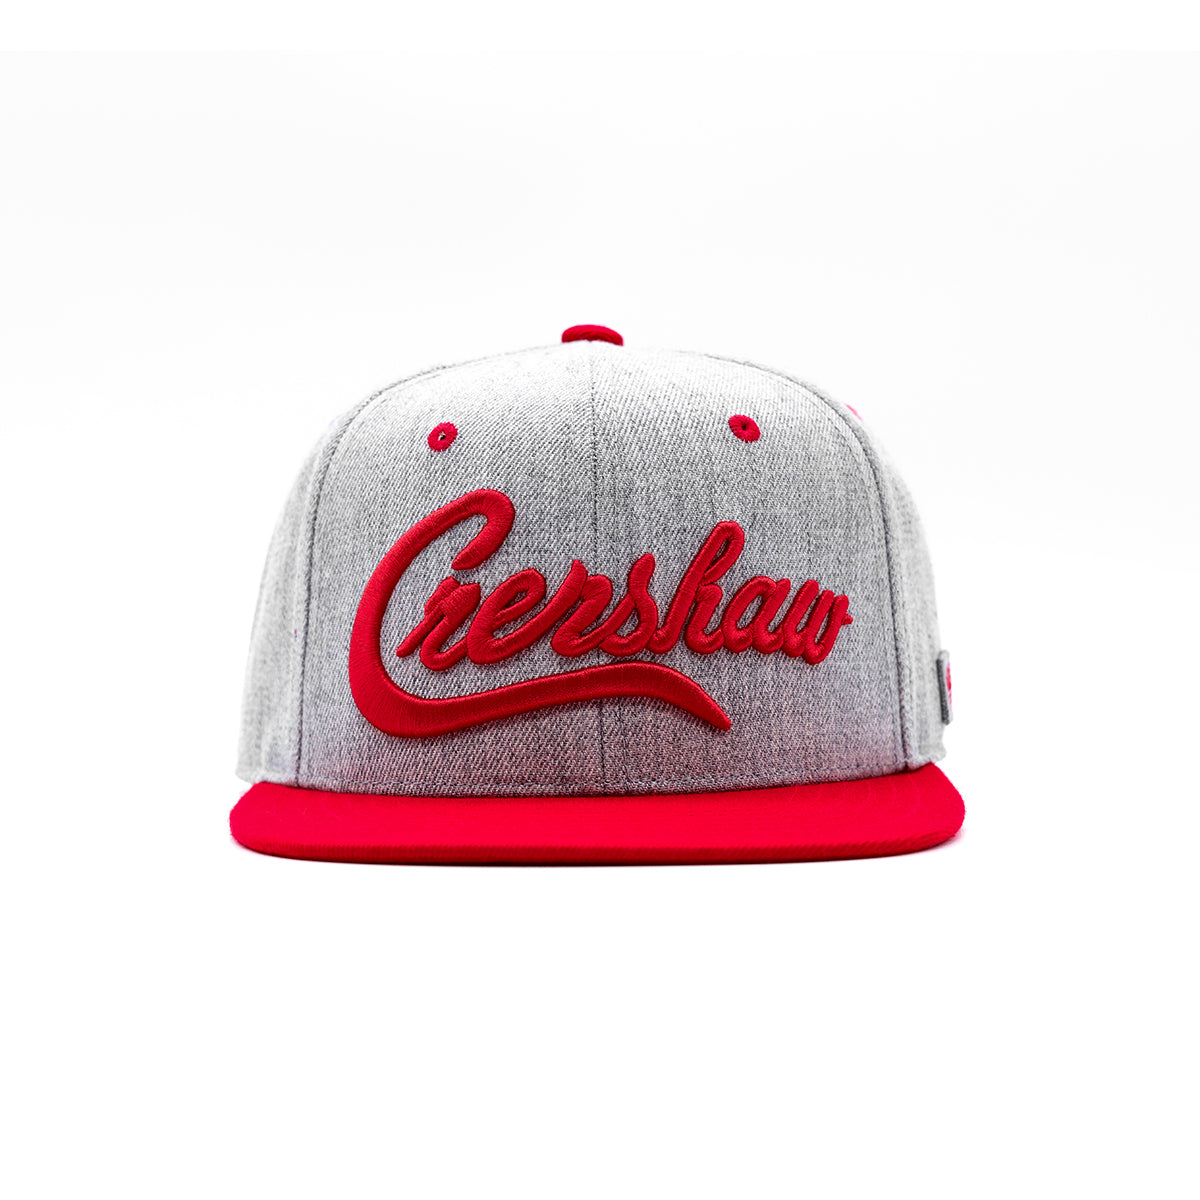 Crenshaw Limited Edition Snapback - Gray/Red [Two-Tone] - Front